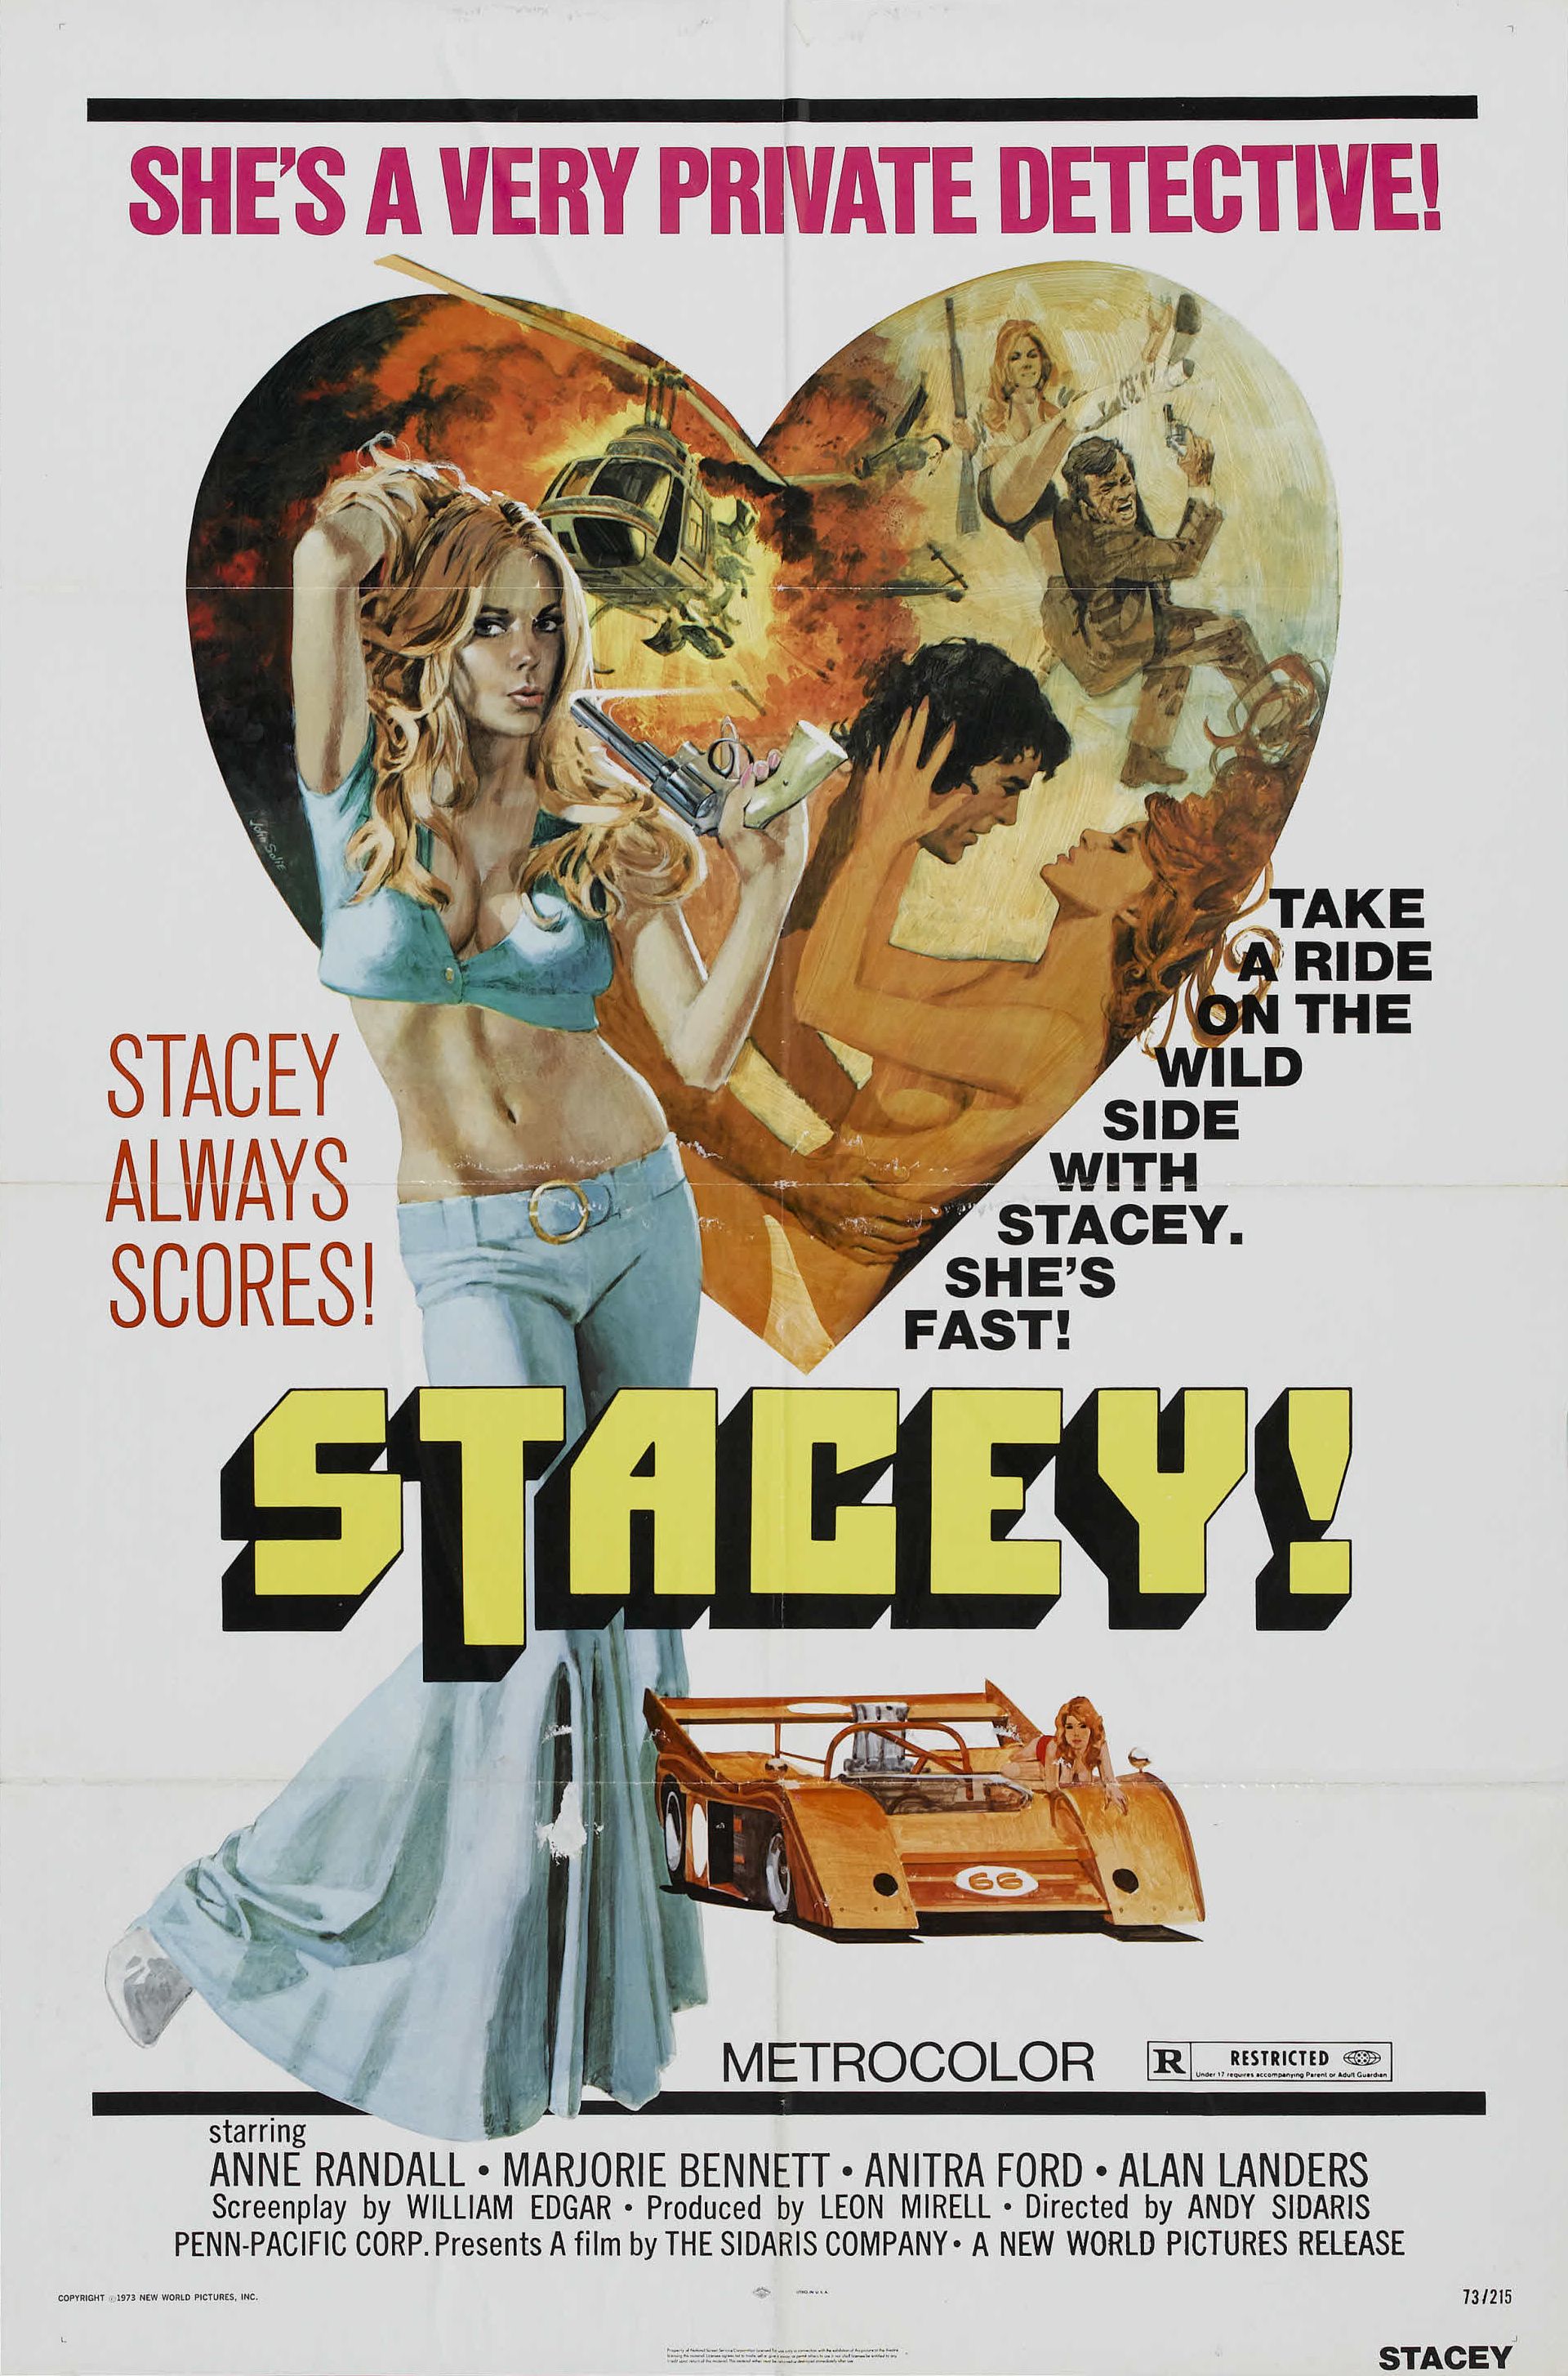 stacey 1973 - She'S A Very Private Detective! Stacey Always Scores! Take A Ride On The Wild Side With Stacey. She'S Fast! Staleye Metrocolor Ente Anne Randall Marjorie Bennett Anitra Ford. Alan Landers Screenplay by Willian Fdgaap by Leon Viell Directed b